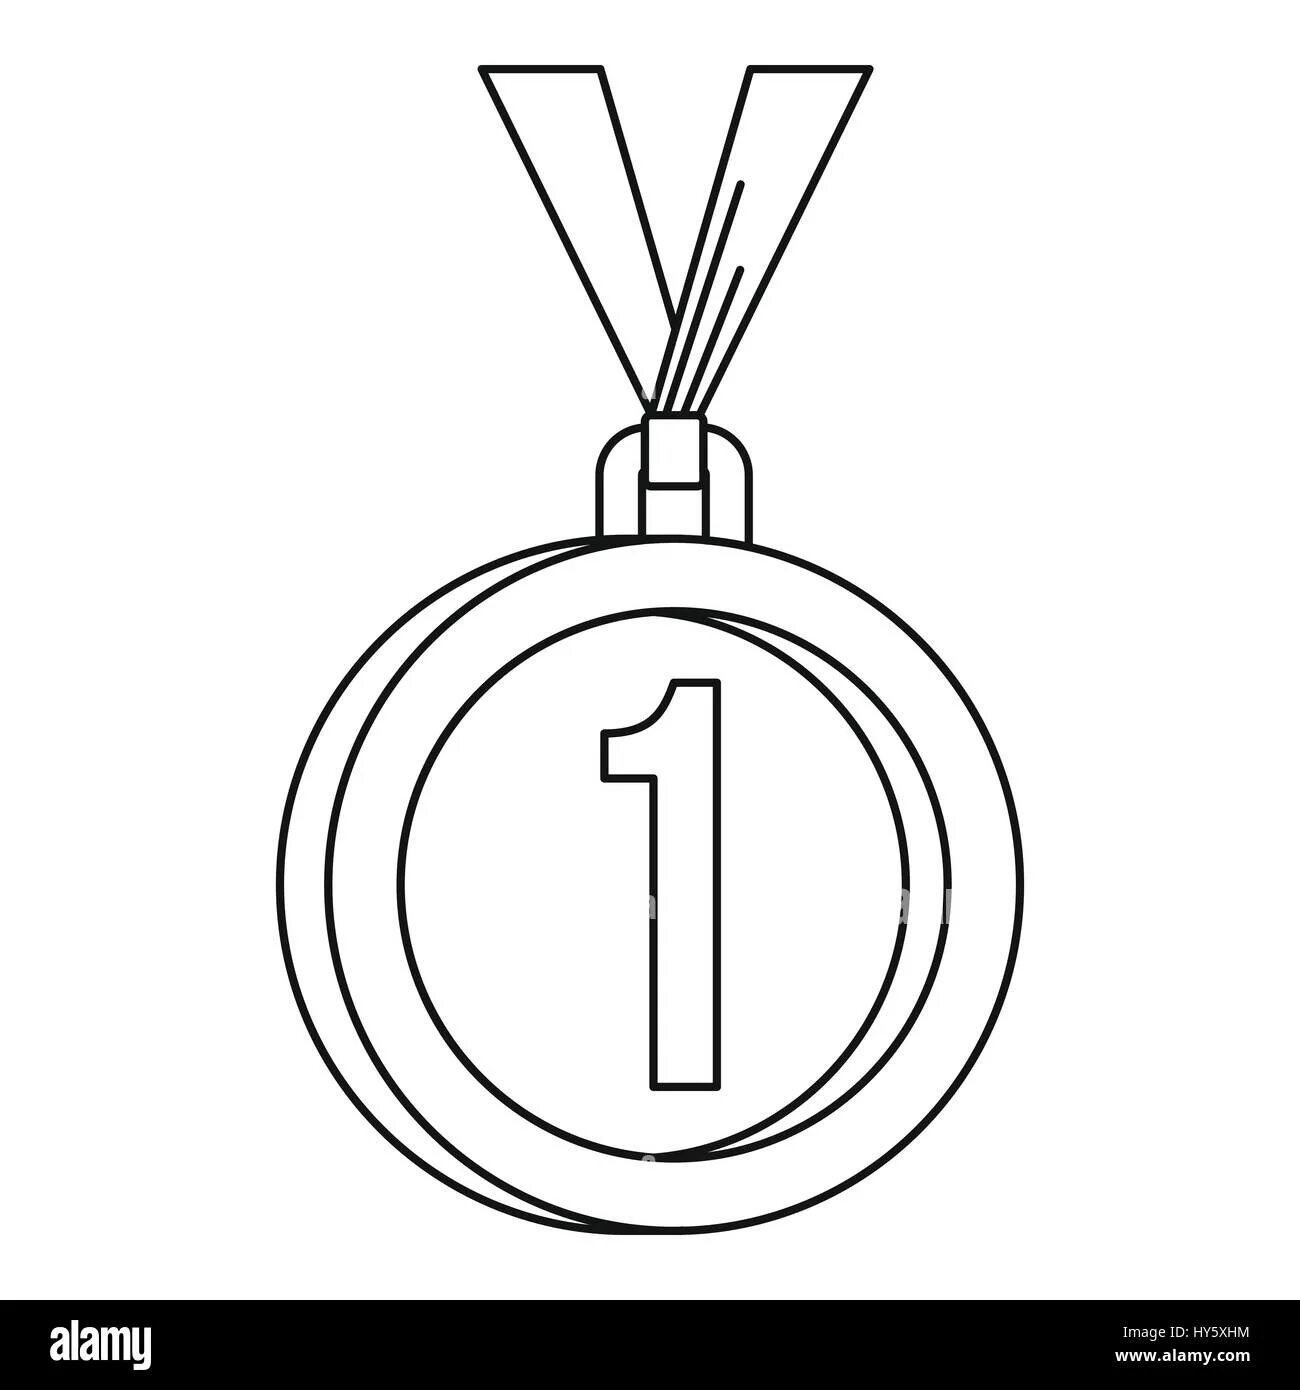 Coloring page creative medal template